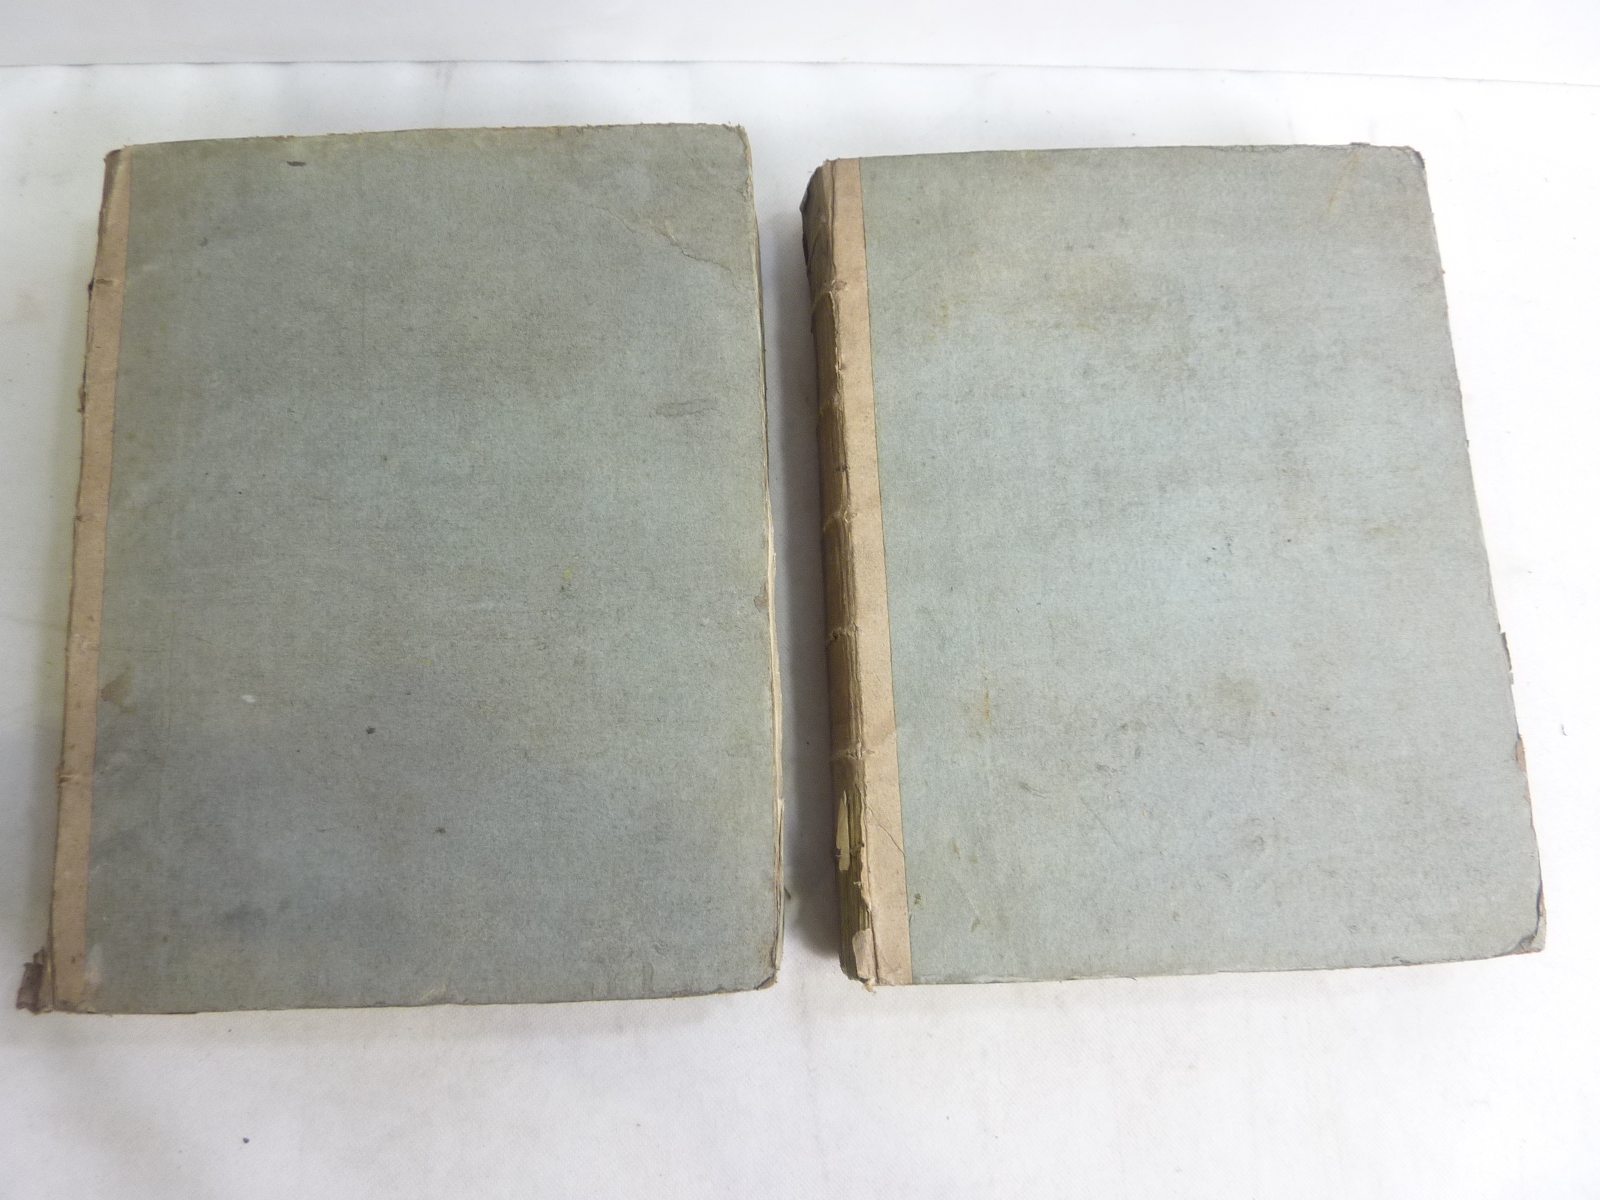 BOWER ARCHIBALD. The History of the Popes. Vols. 1 & 2. Orig. brds. 1750.